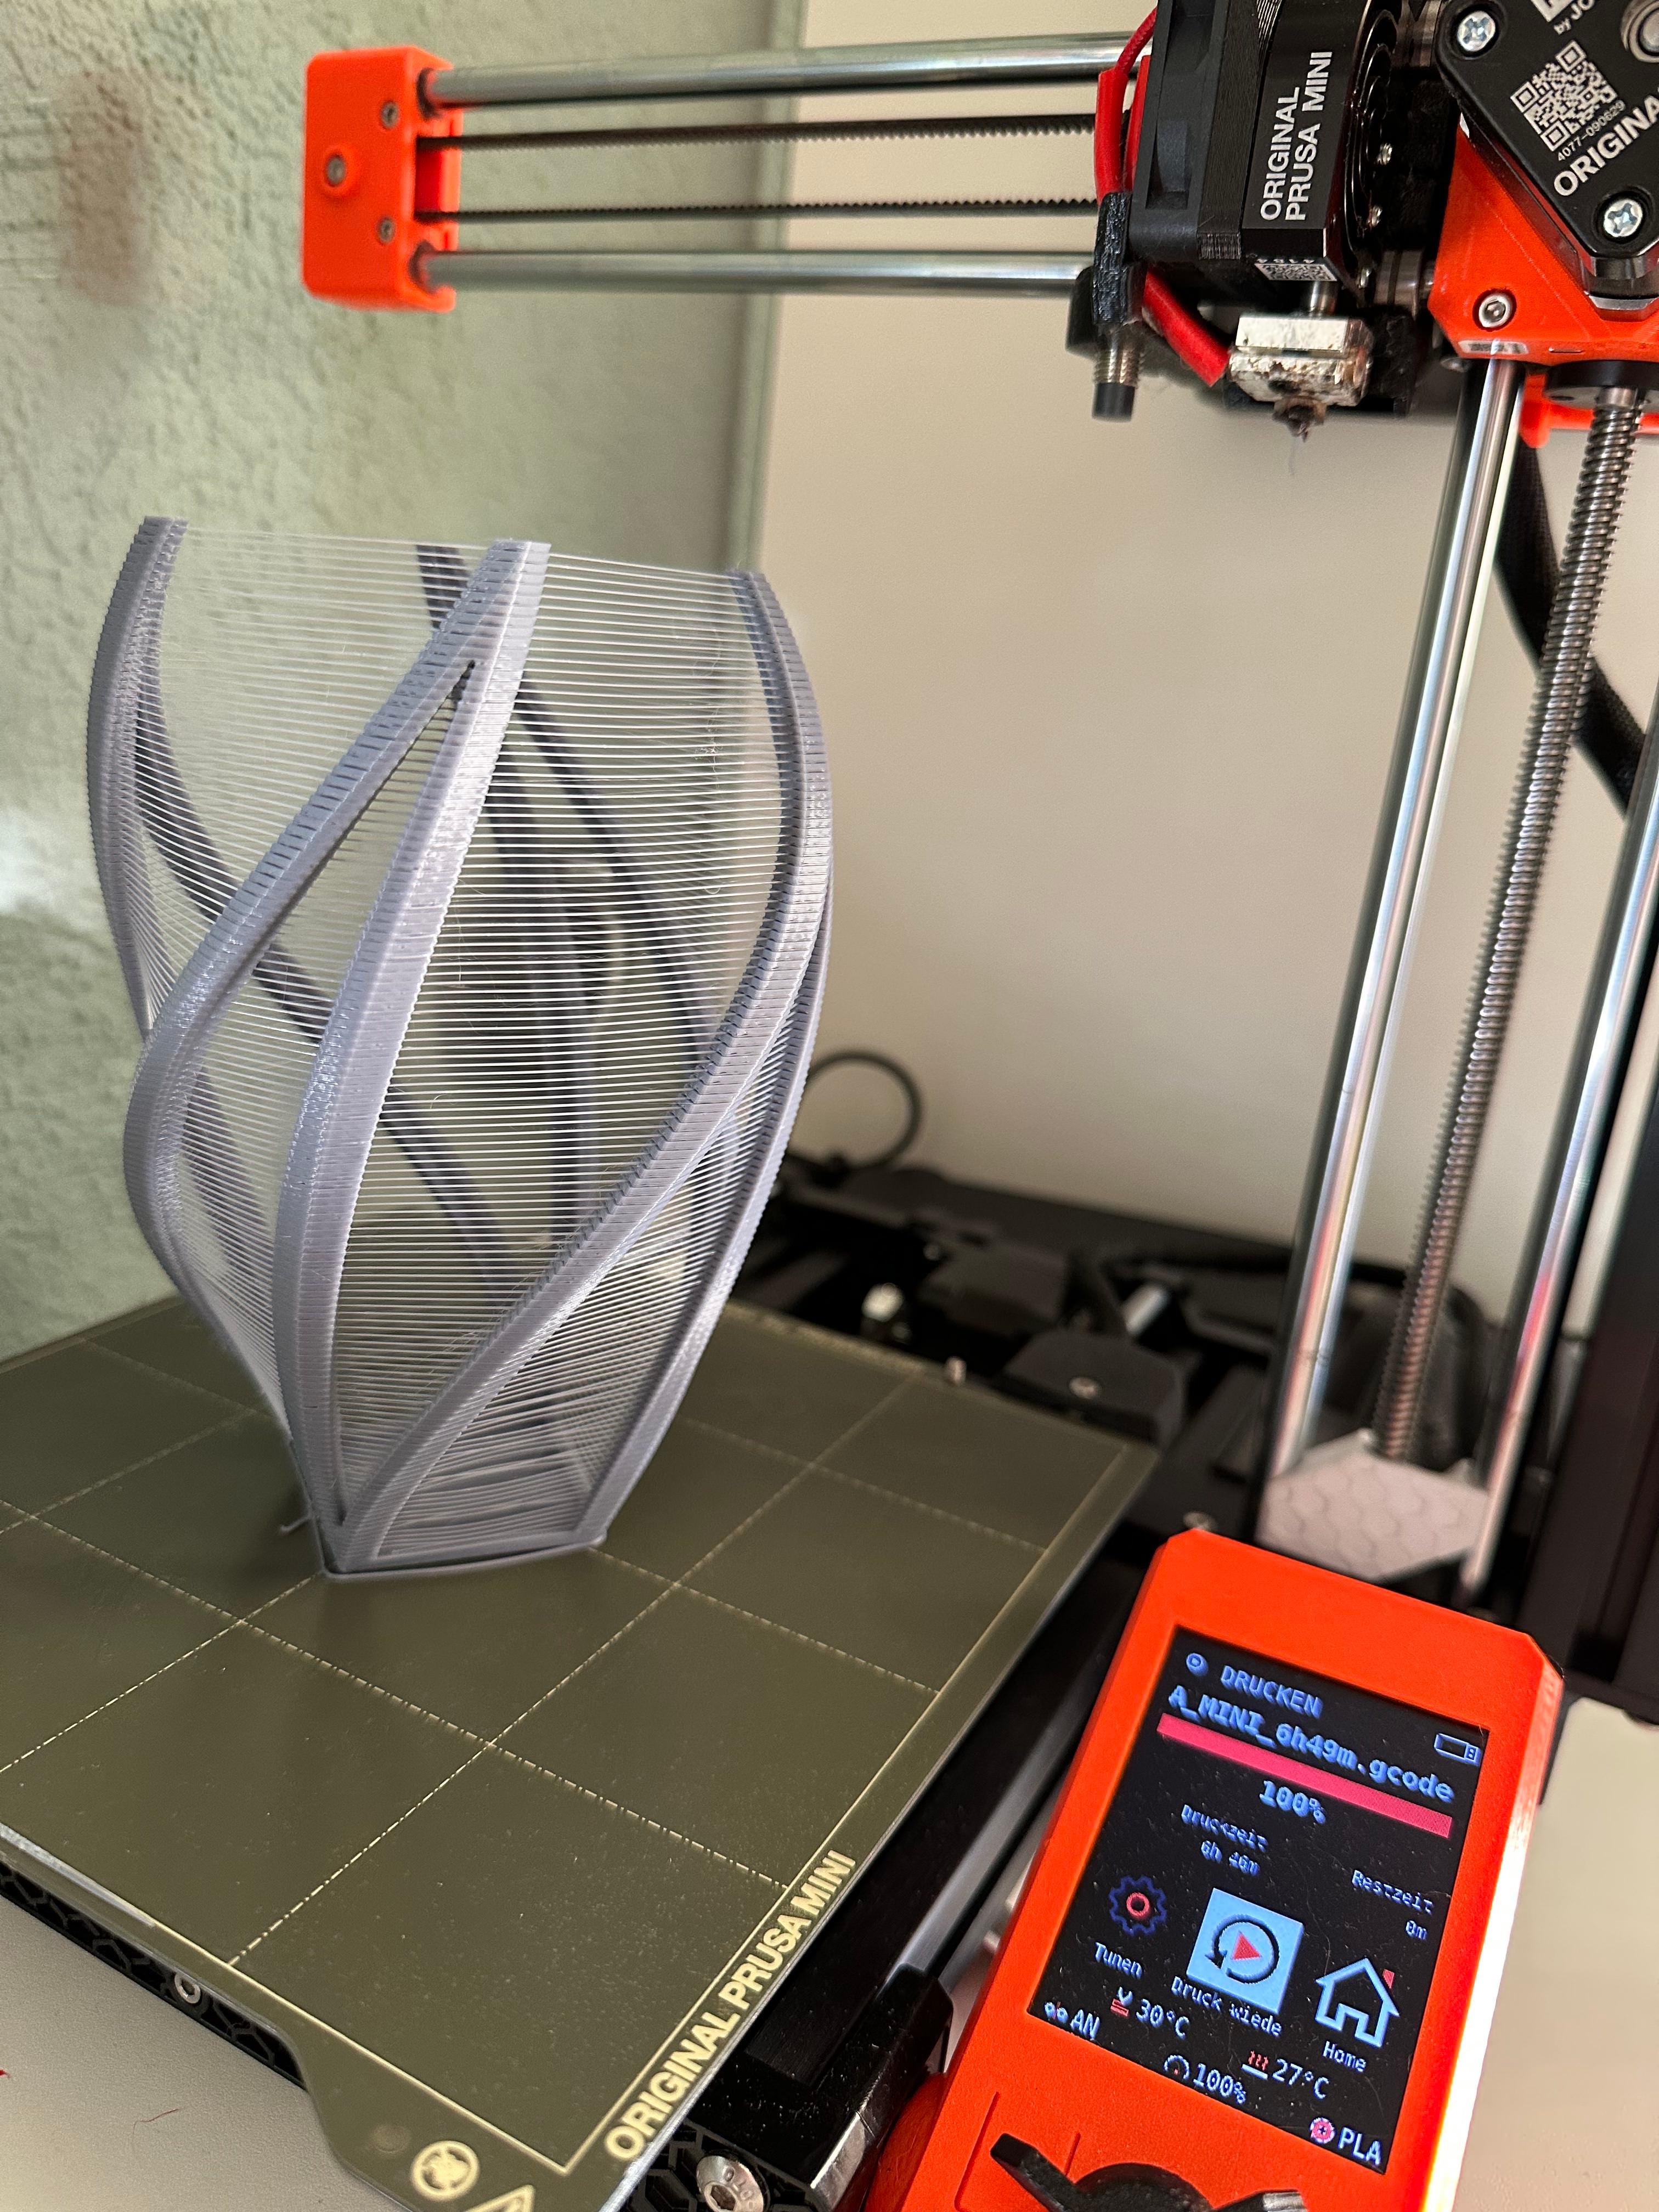 Twisty String Vase - I was able to print it with 0,2 mm layer height.
Impressed about the design, and the result.
OK, some strings are "glued" together. - 3d model